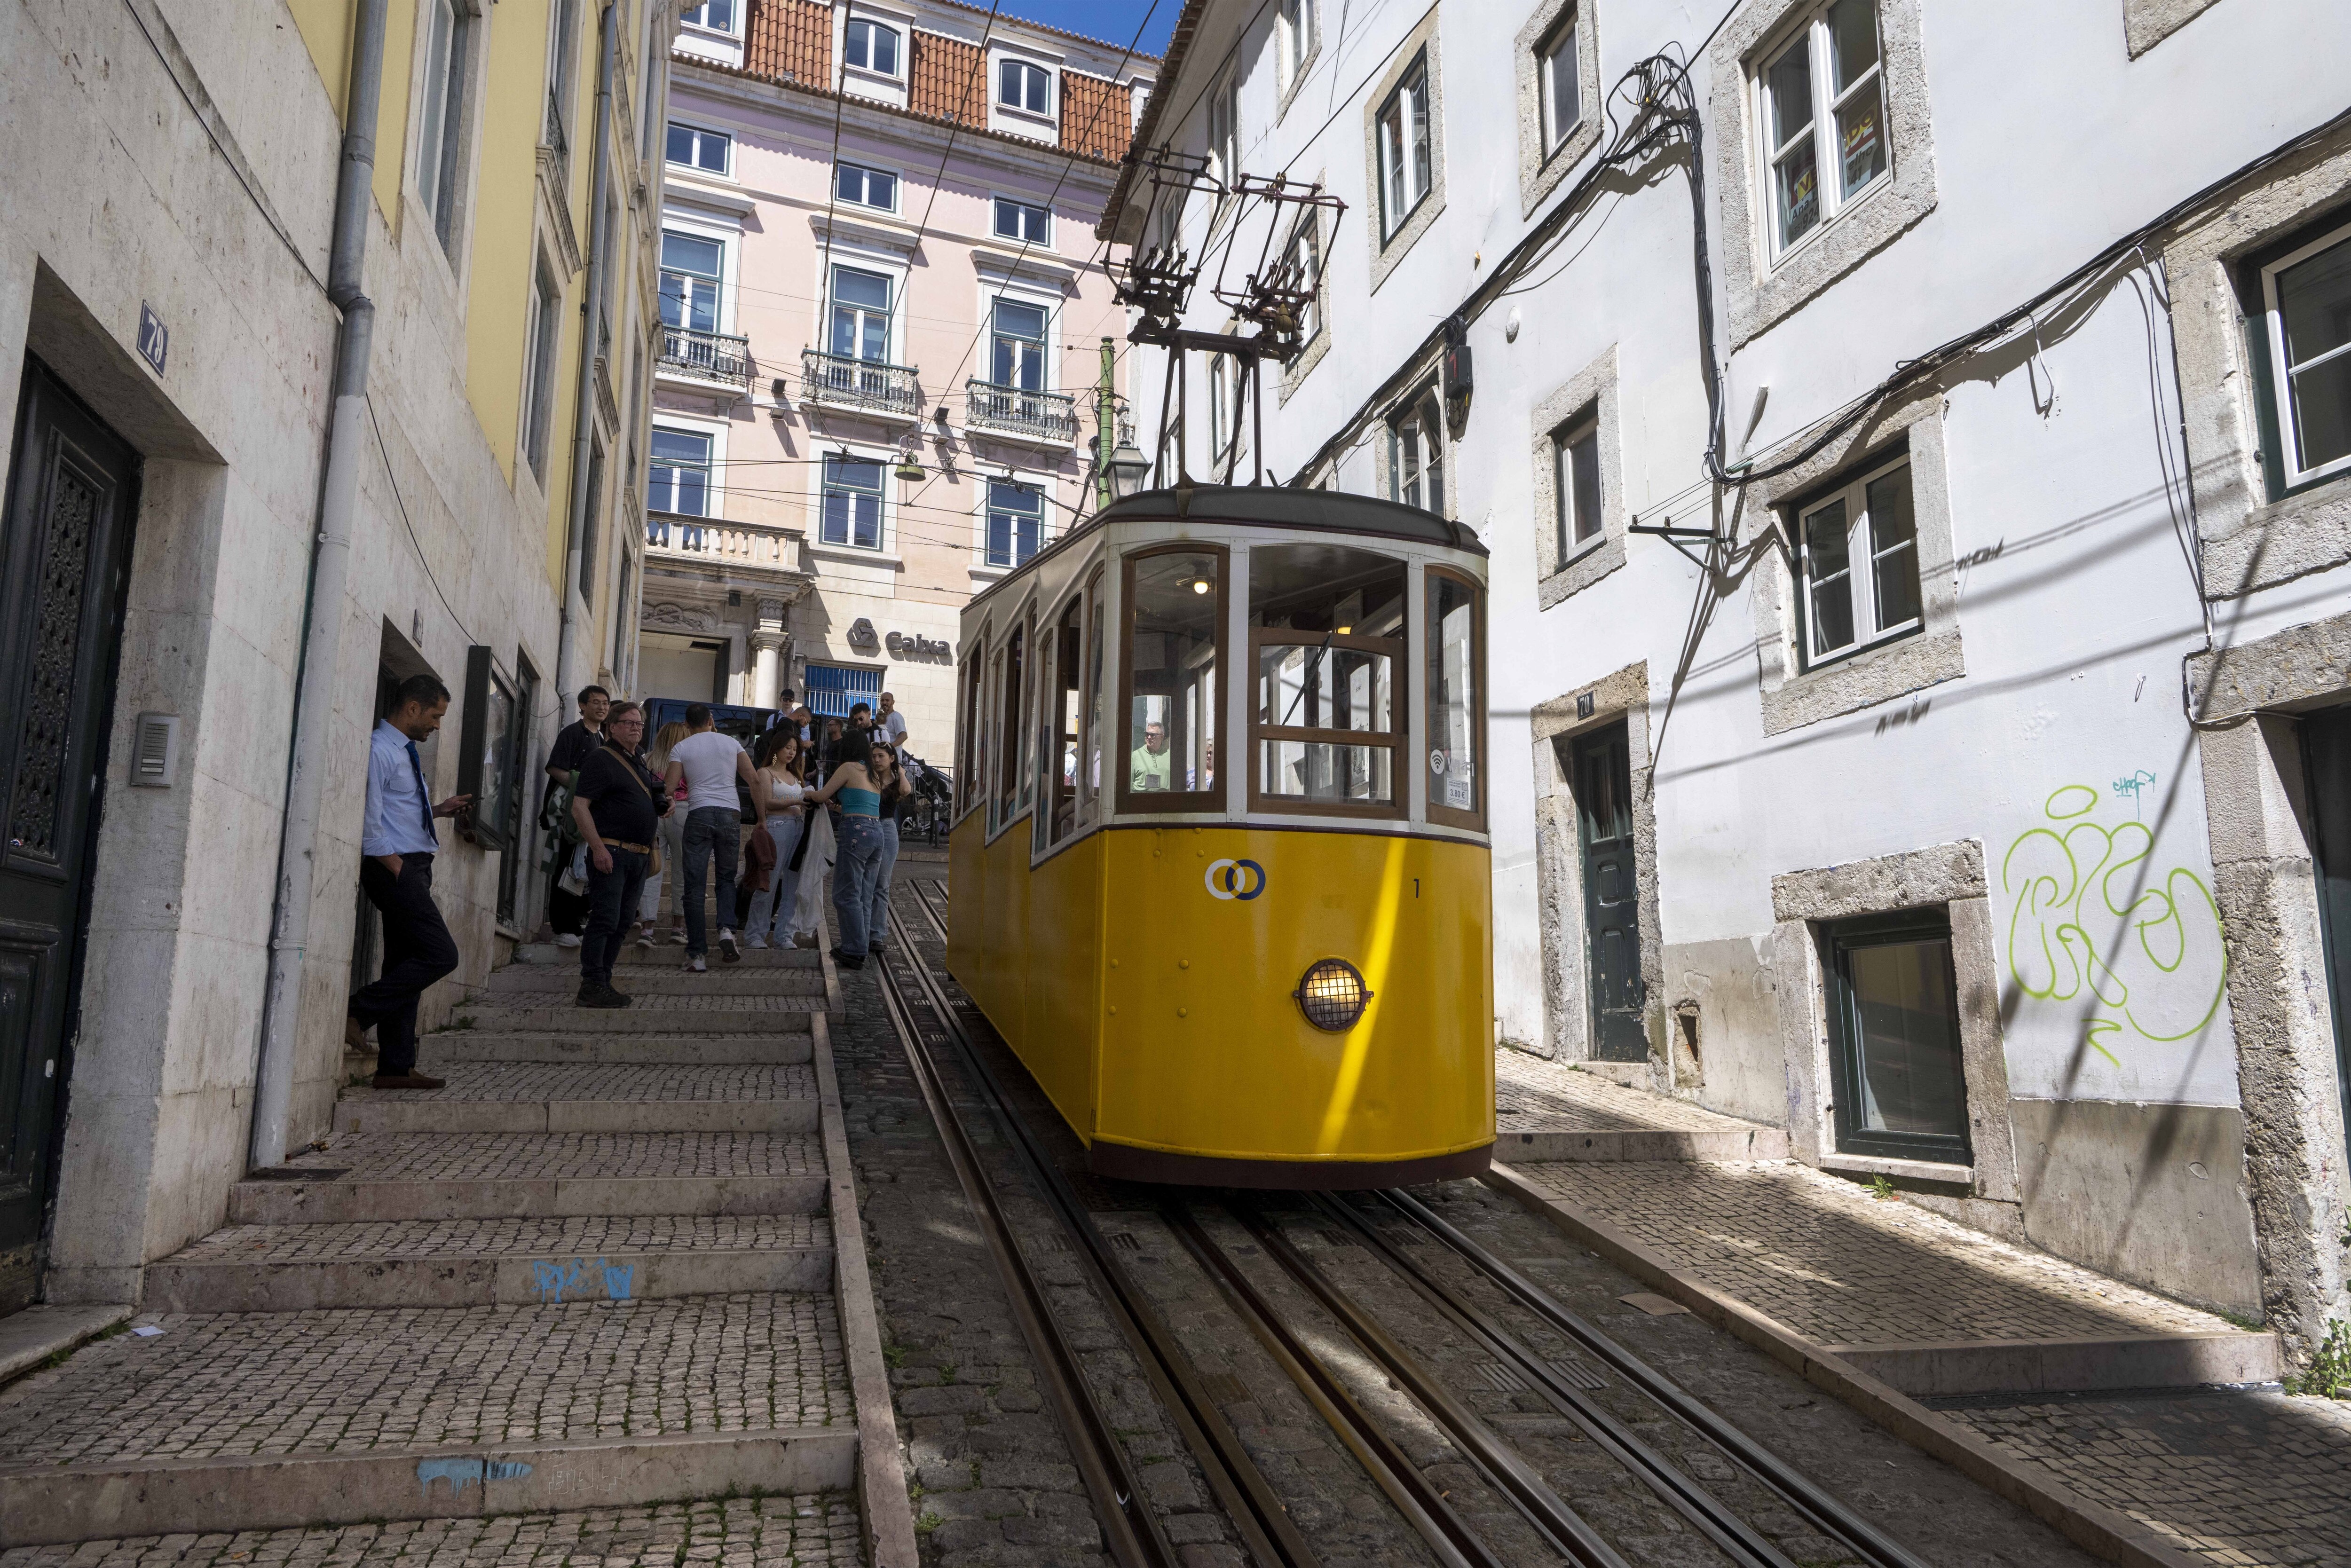 The funicular was finally opened by the mayor of Lisbon this week